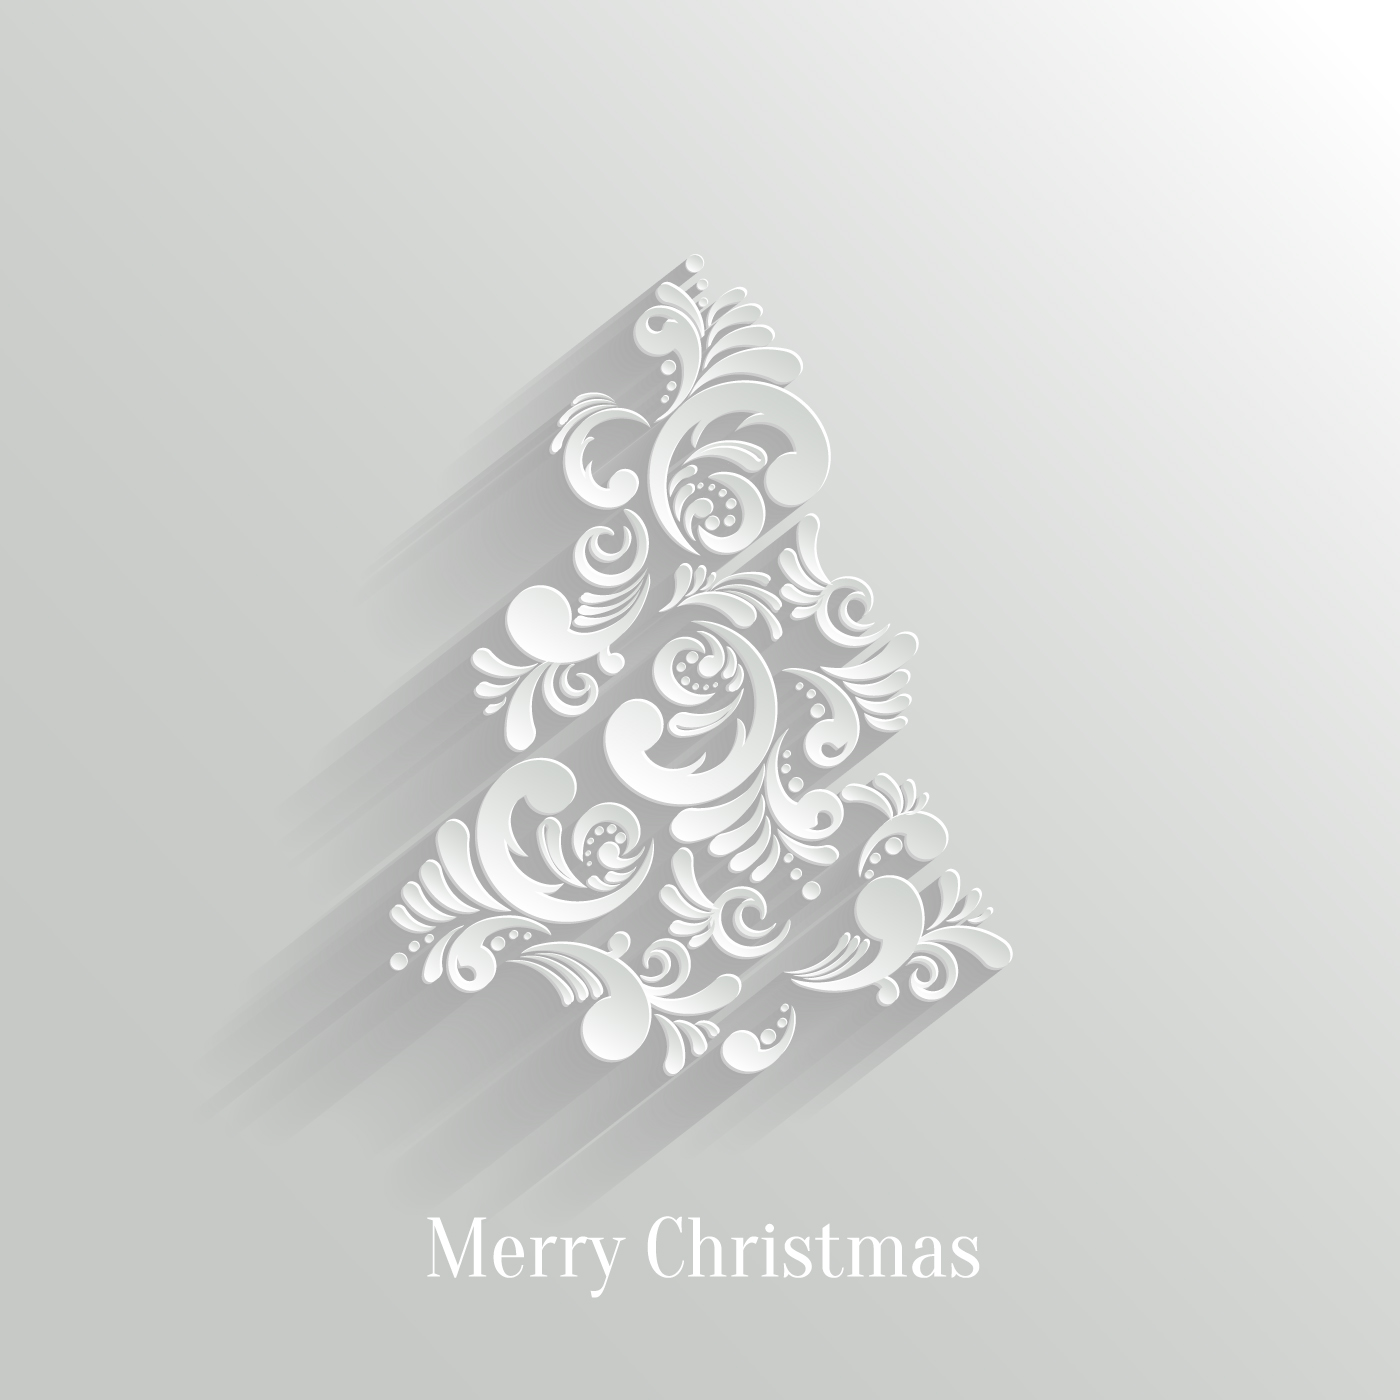 Paper Floral White Christmas Backgrounds Vector 03  